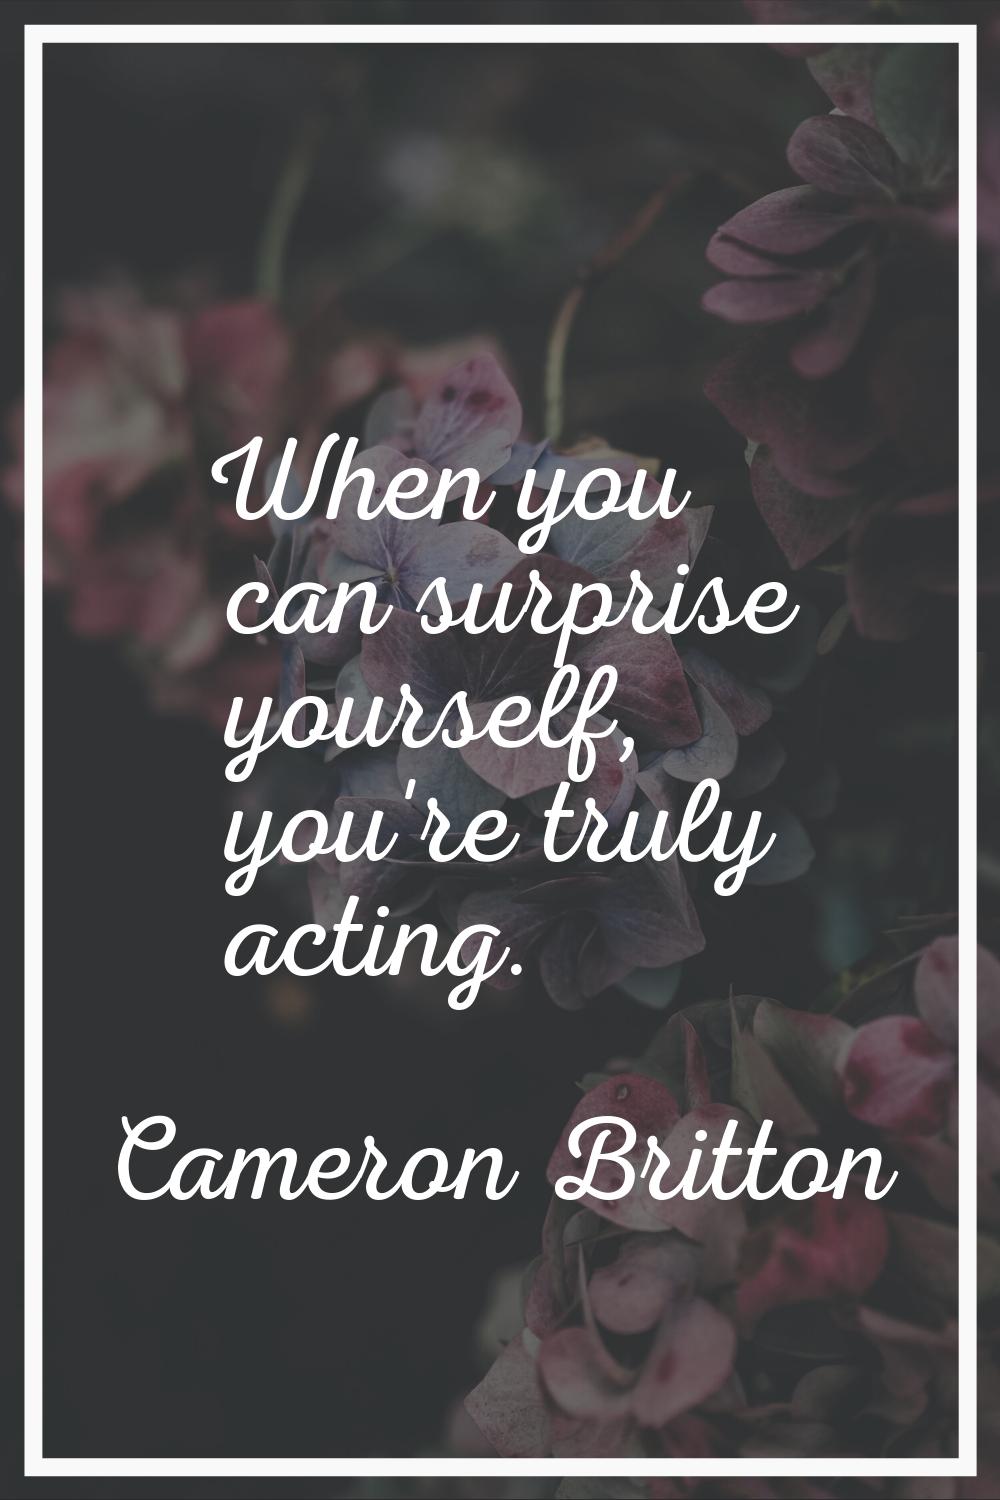 When you can surprise yourself, you're truly acting.